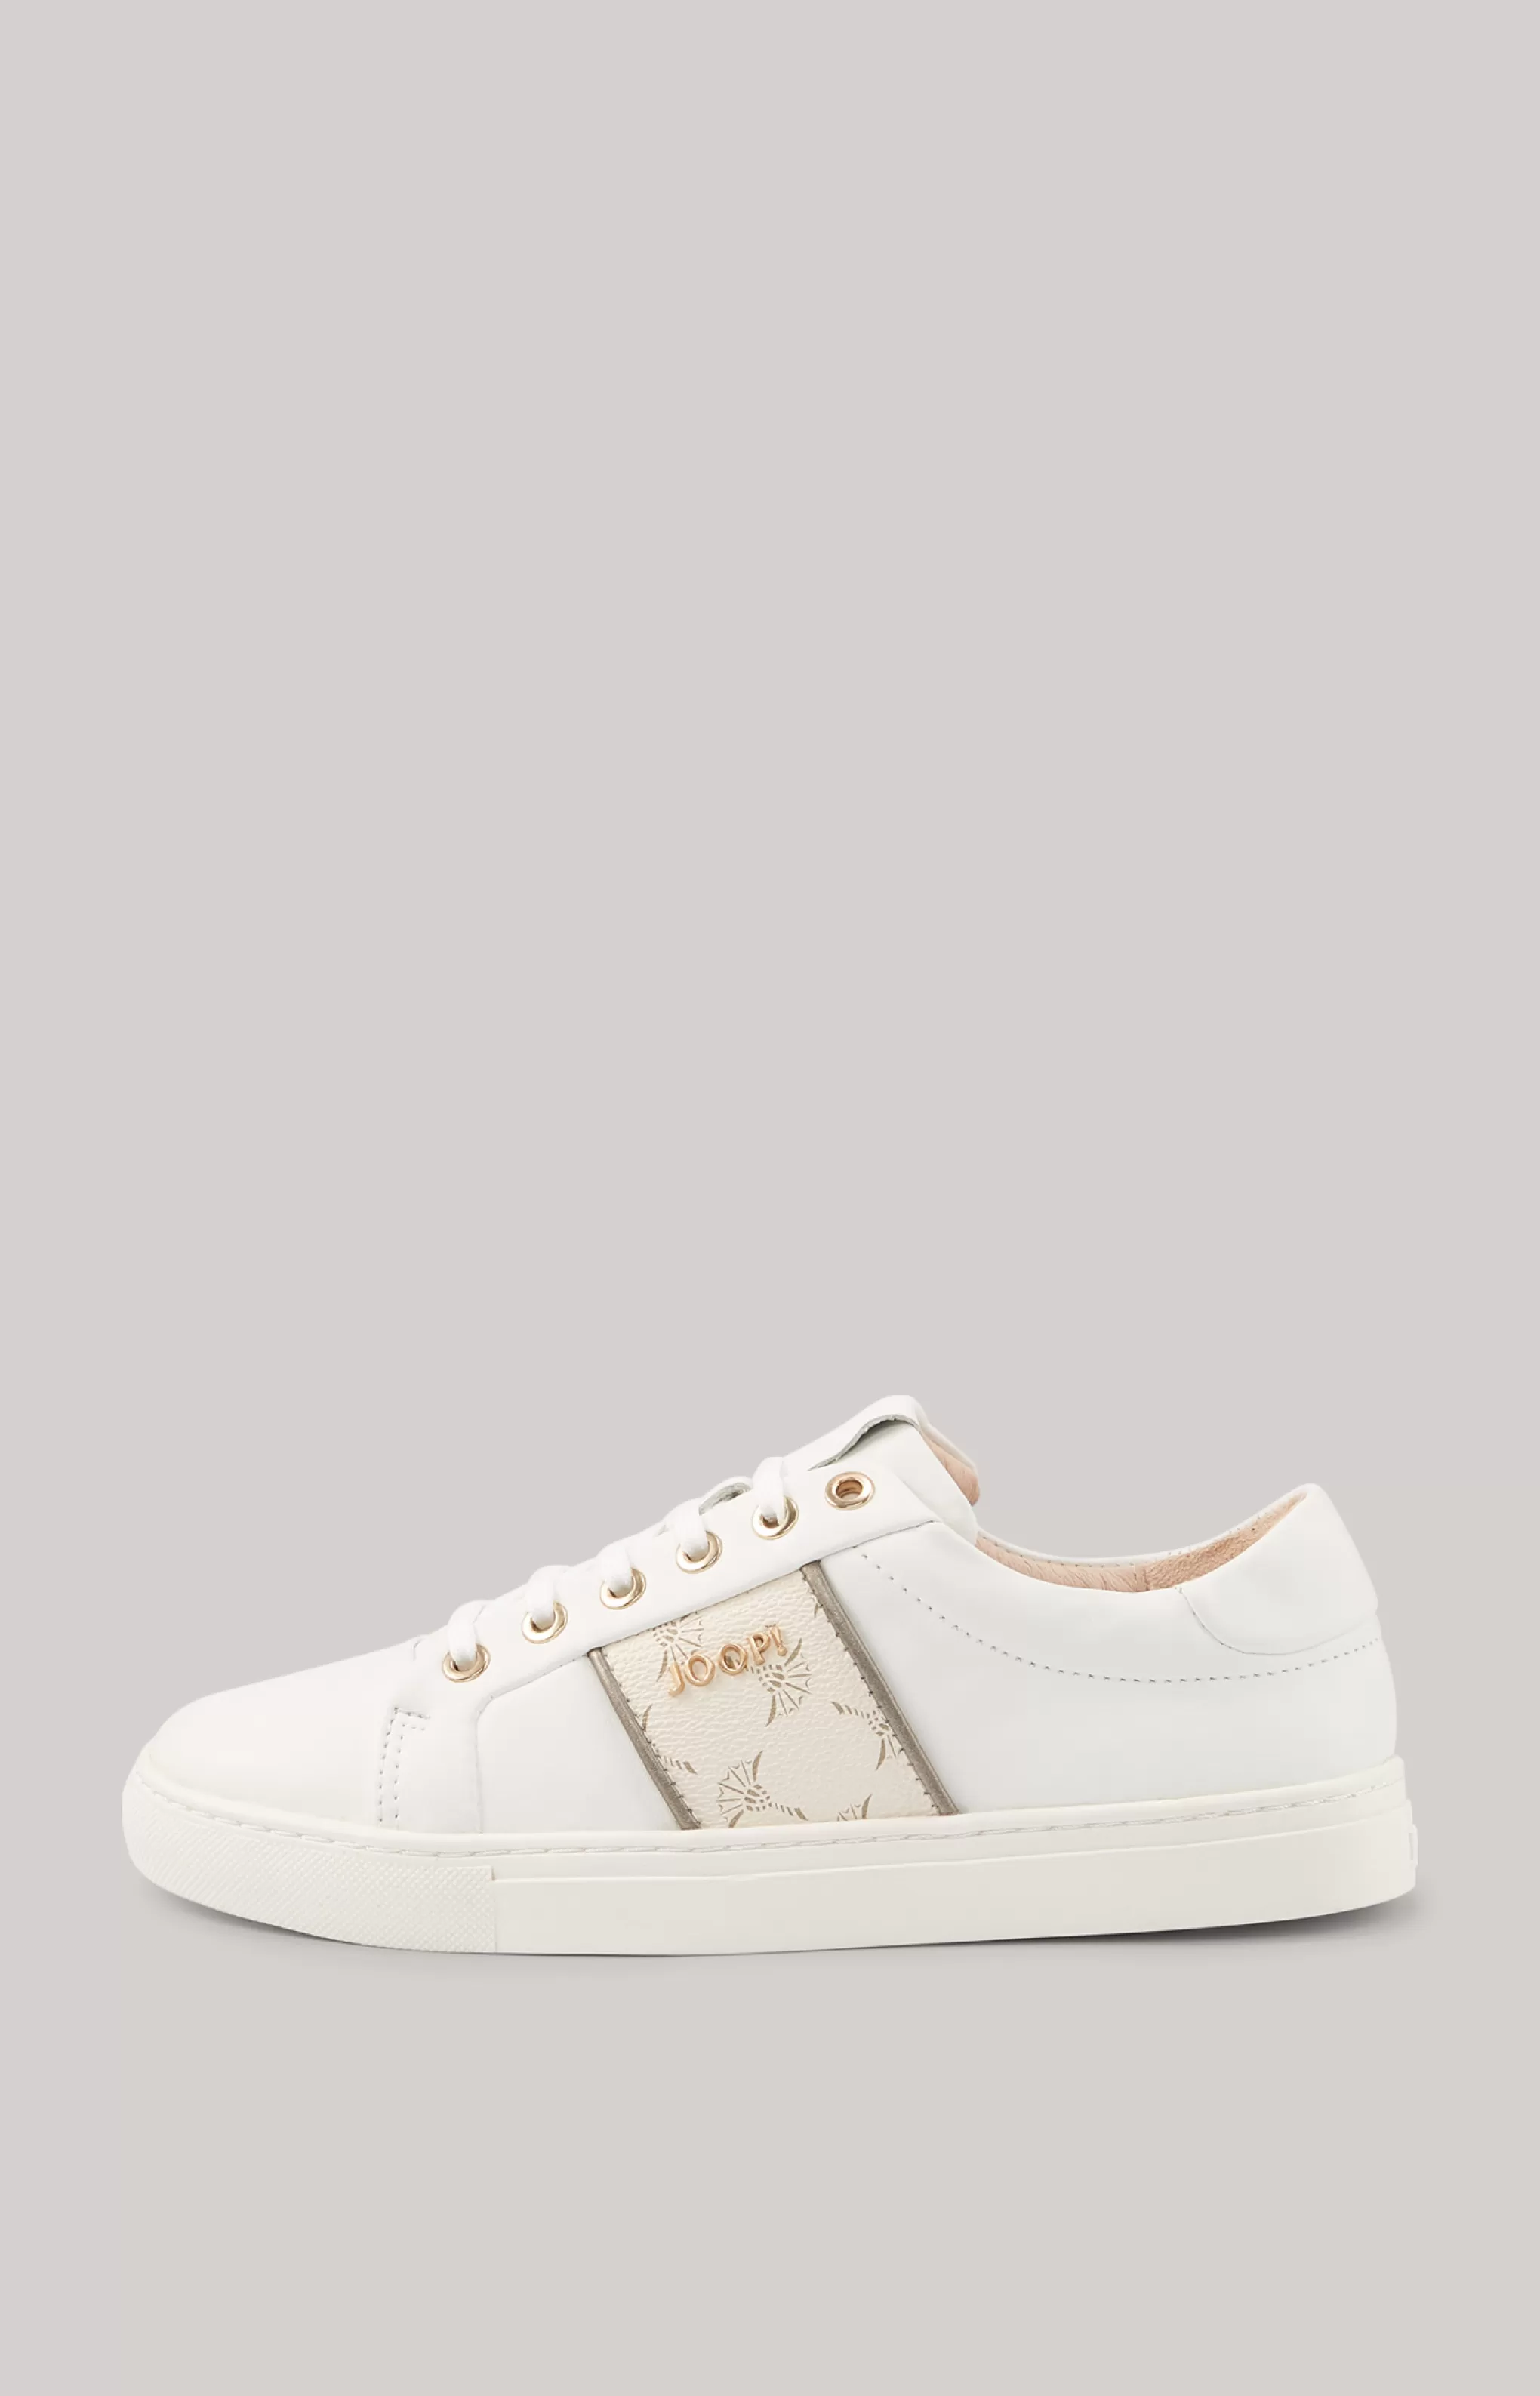 Shoes*JOOP Shoes Cortina Lista Coralie Trainers in Off-white/Rosé